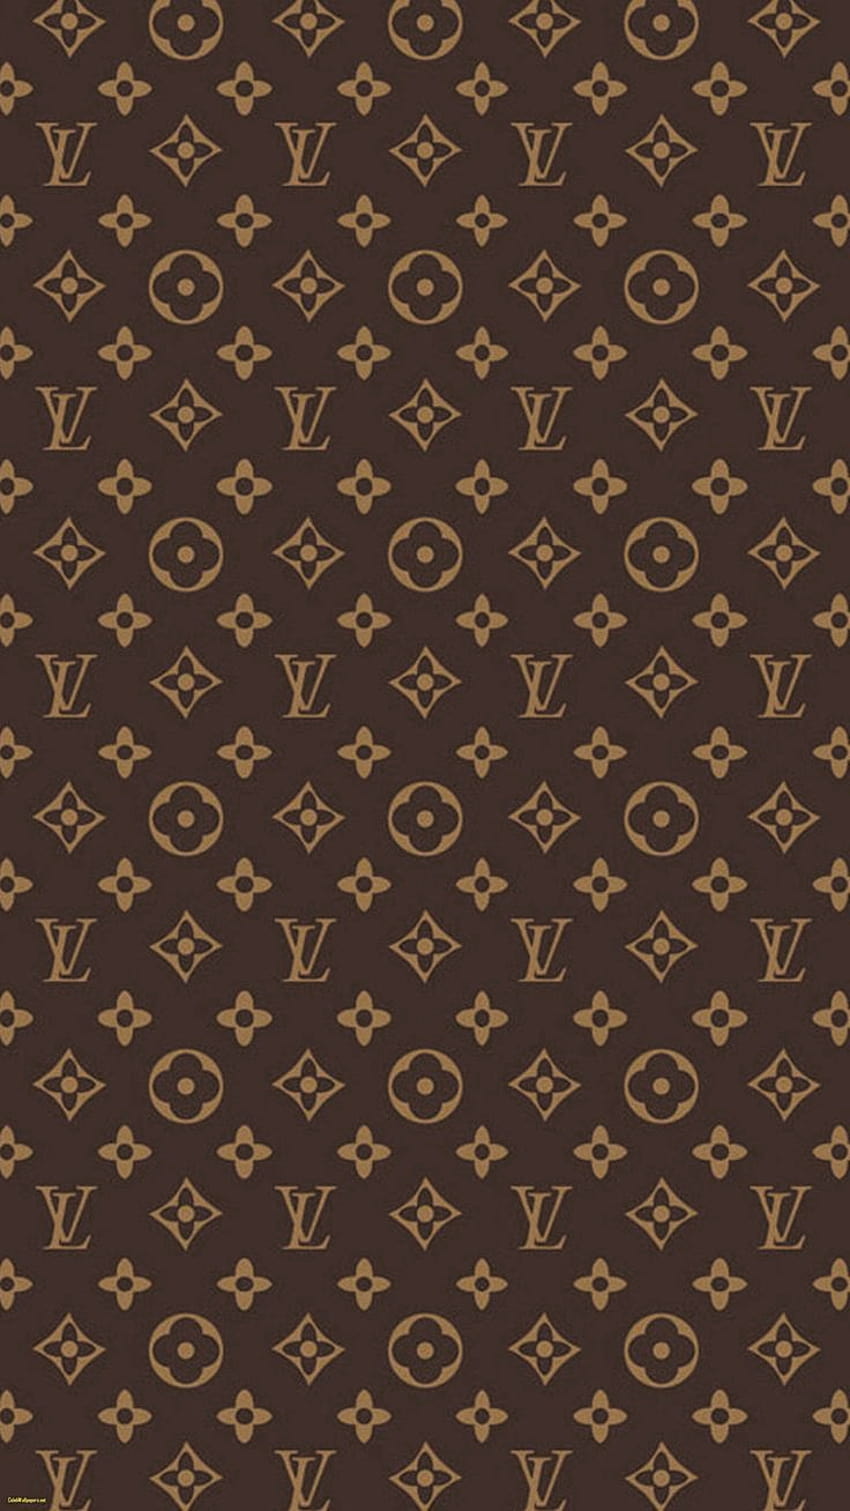 Download A Refined Luxury Aesthetic  Louis Vuitton Wallpaper  Wallpapers com